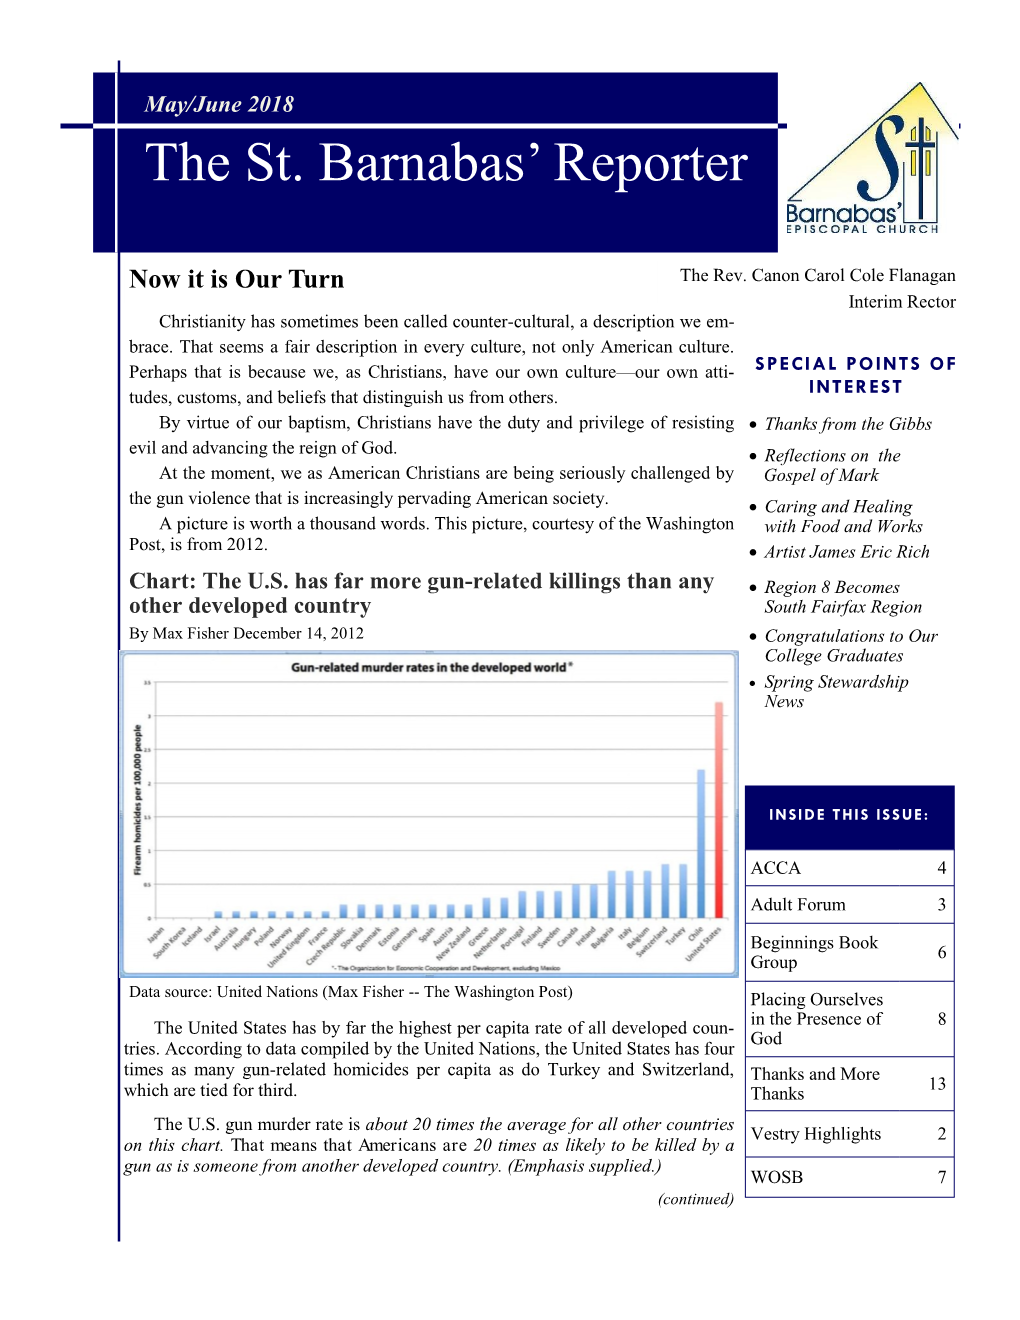 The St. Barnabas' Reporter